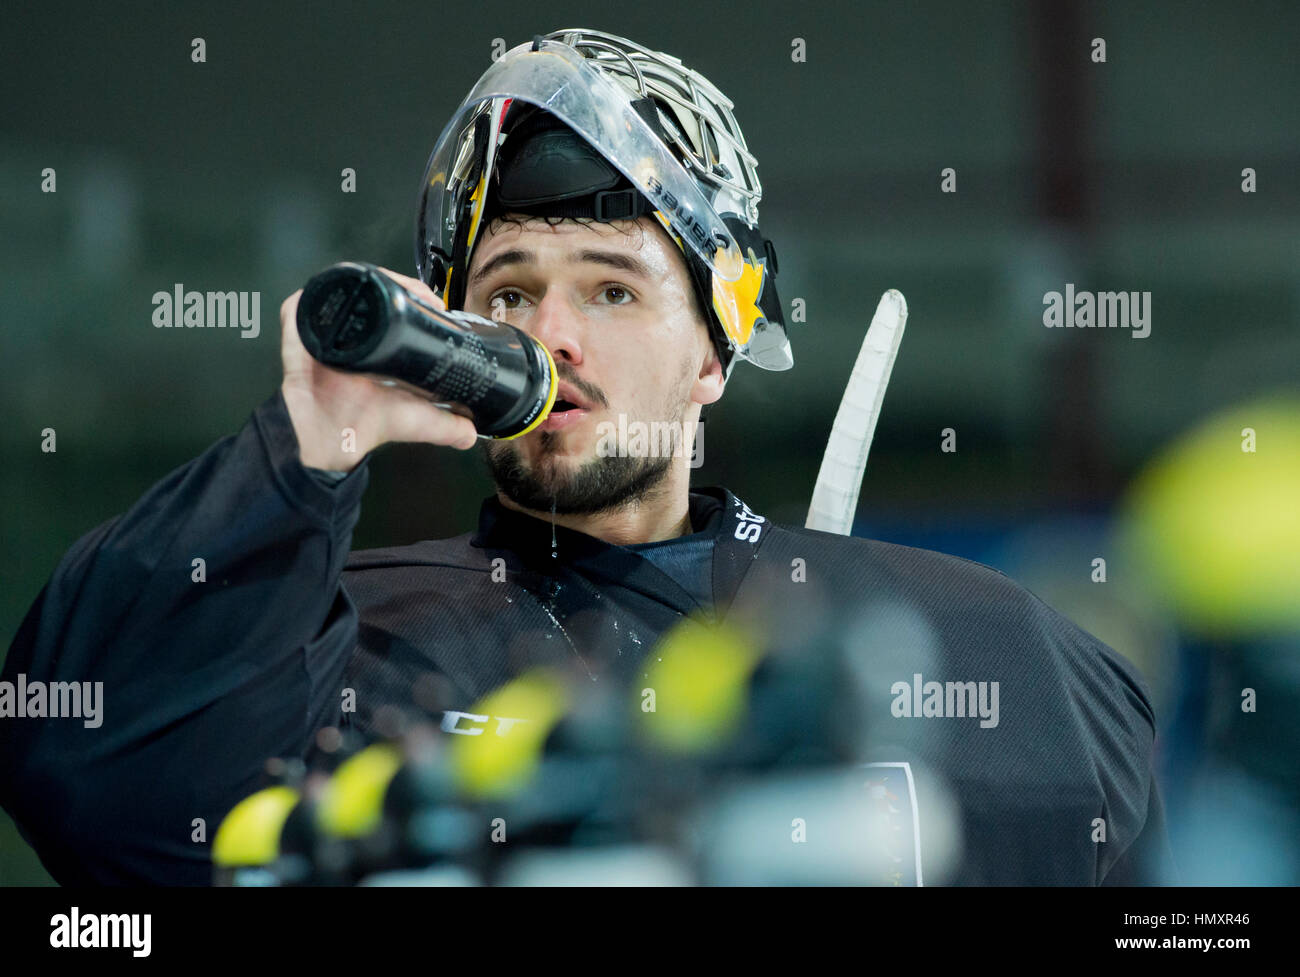 Prague, Czech Republic. 07th Feb, 2017. The Czech national ice-hockey team's player goalie Jakub Kovar in action during the training session prior to the February Sweden Games in Gothenburg in Prague, Czech Republic, February 7, 2017. Sweden Games, the third part of the European Hockey Tour (EHT) series, will take place on February 9-12. Credit: Vit Simanek/CTK Photo/Alamy Live News Stock Photo